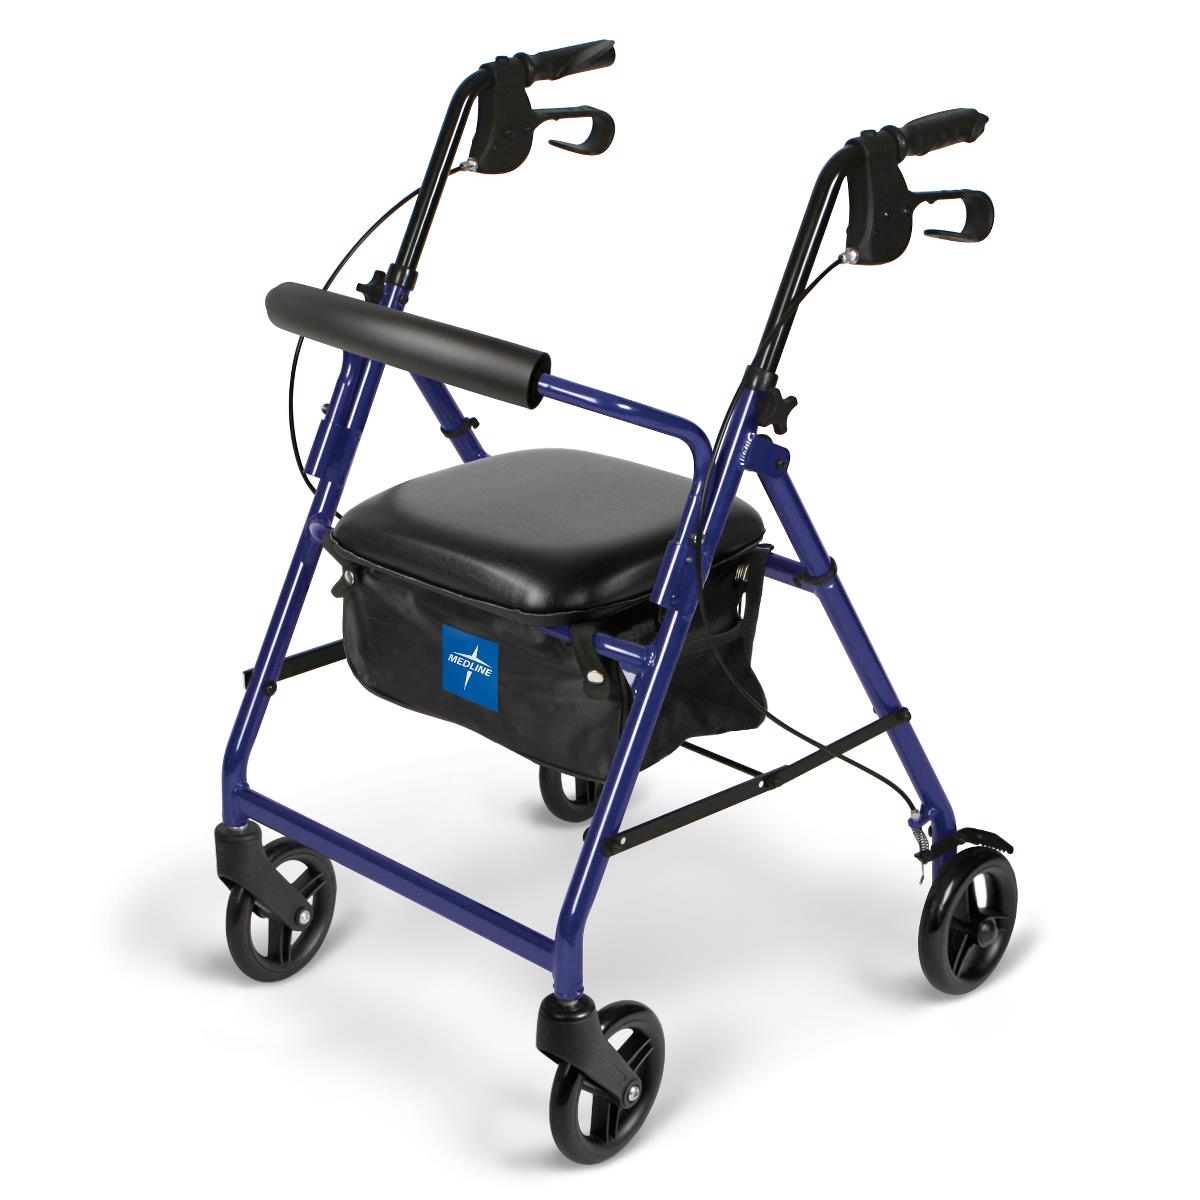 Medline Durable Aluminum Fold Up Mobility Rollator Walker with 6 Inch Wheels and Seat for Adults